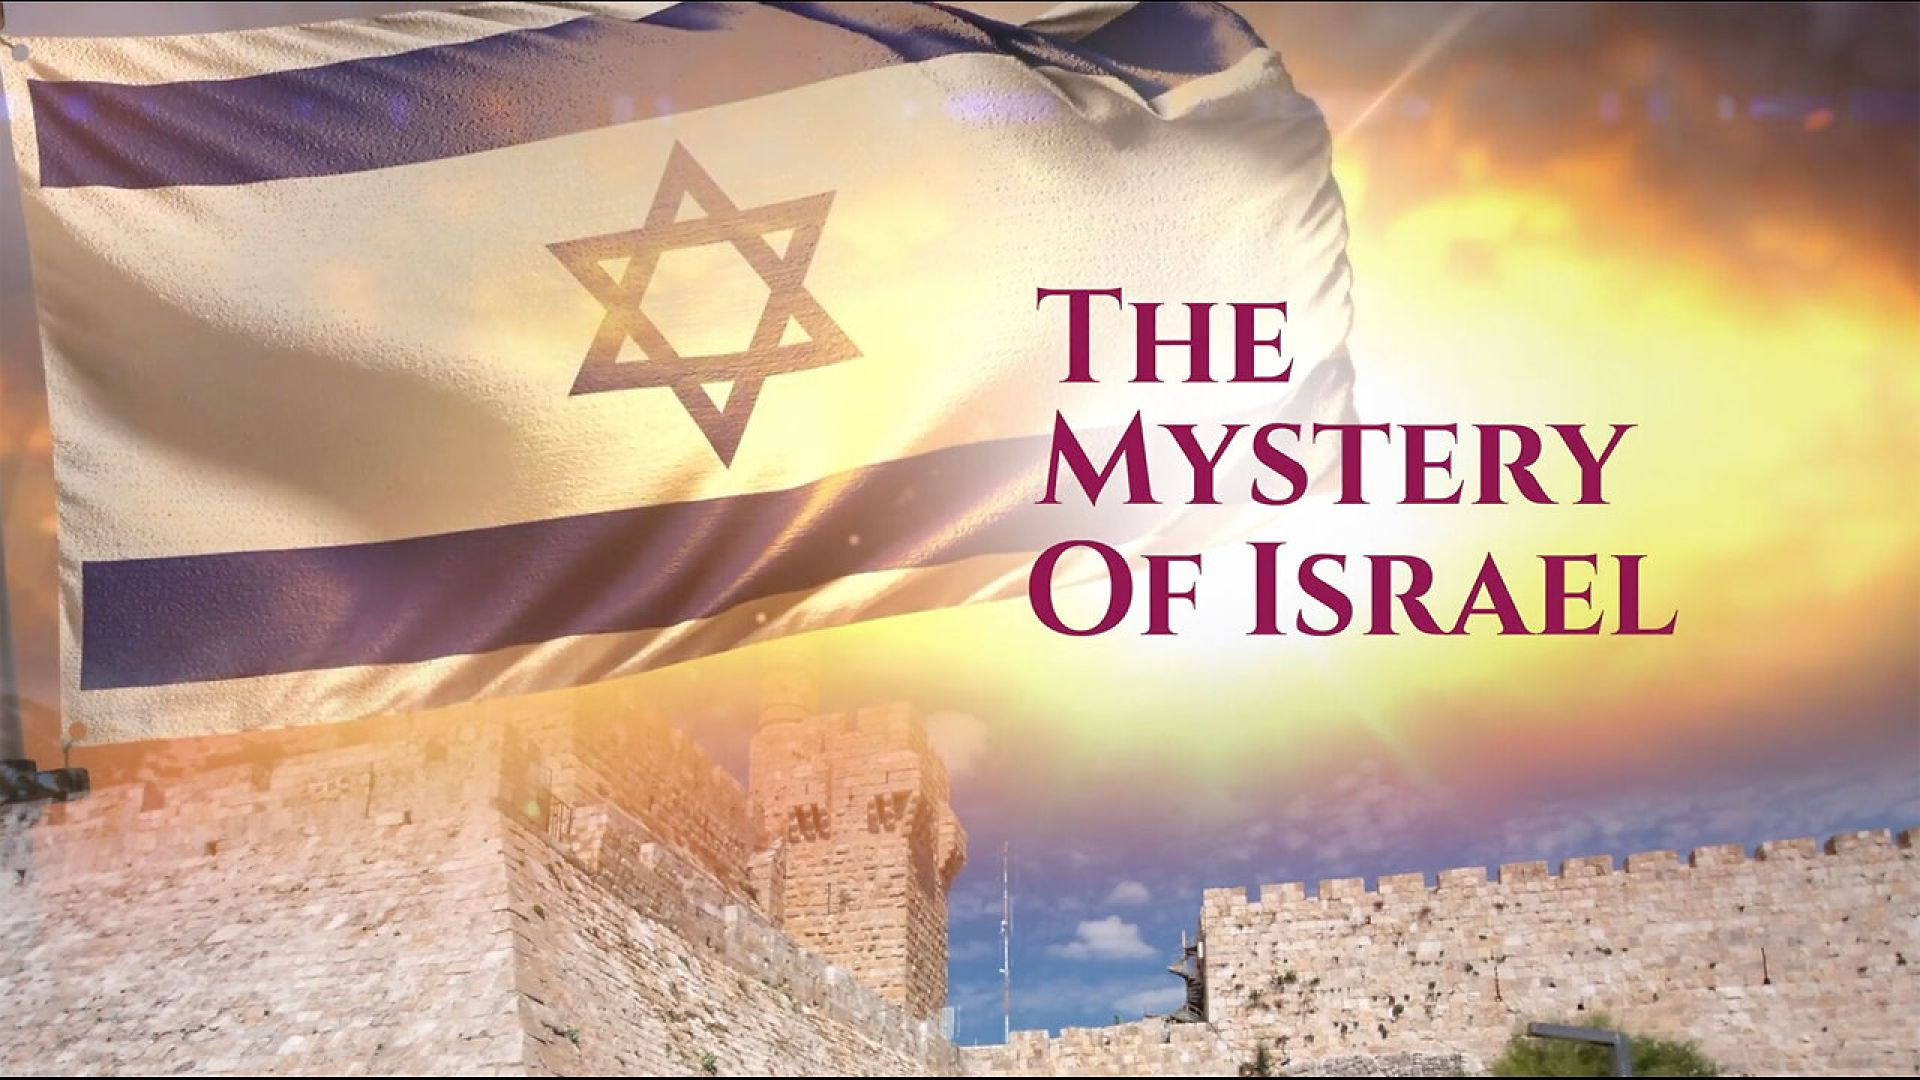 THE MYSTERY OF ISRAEL - SOLVED!